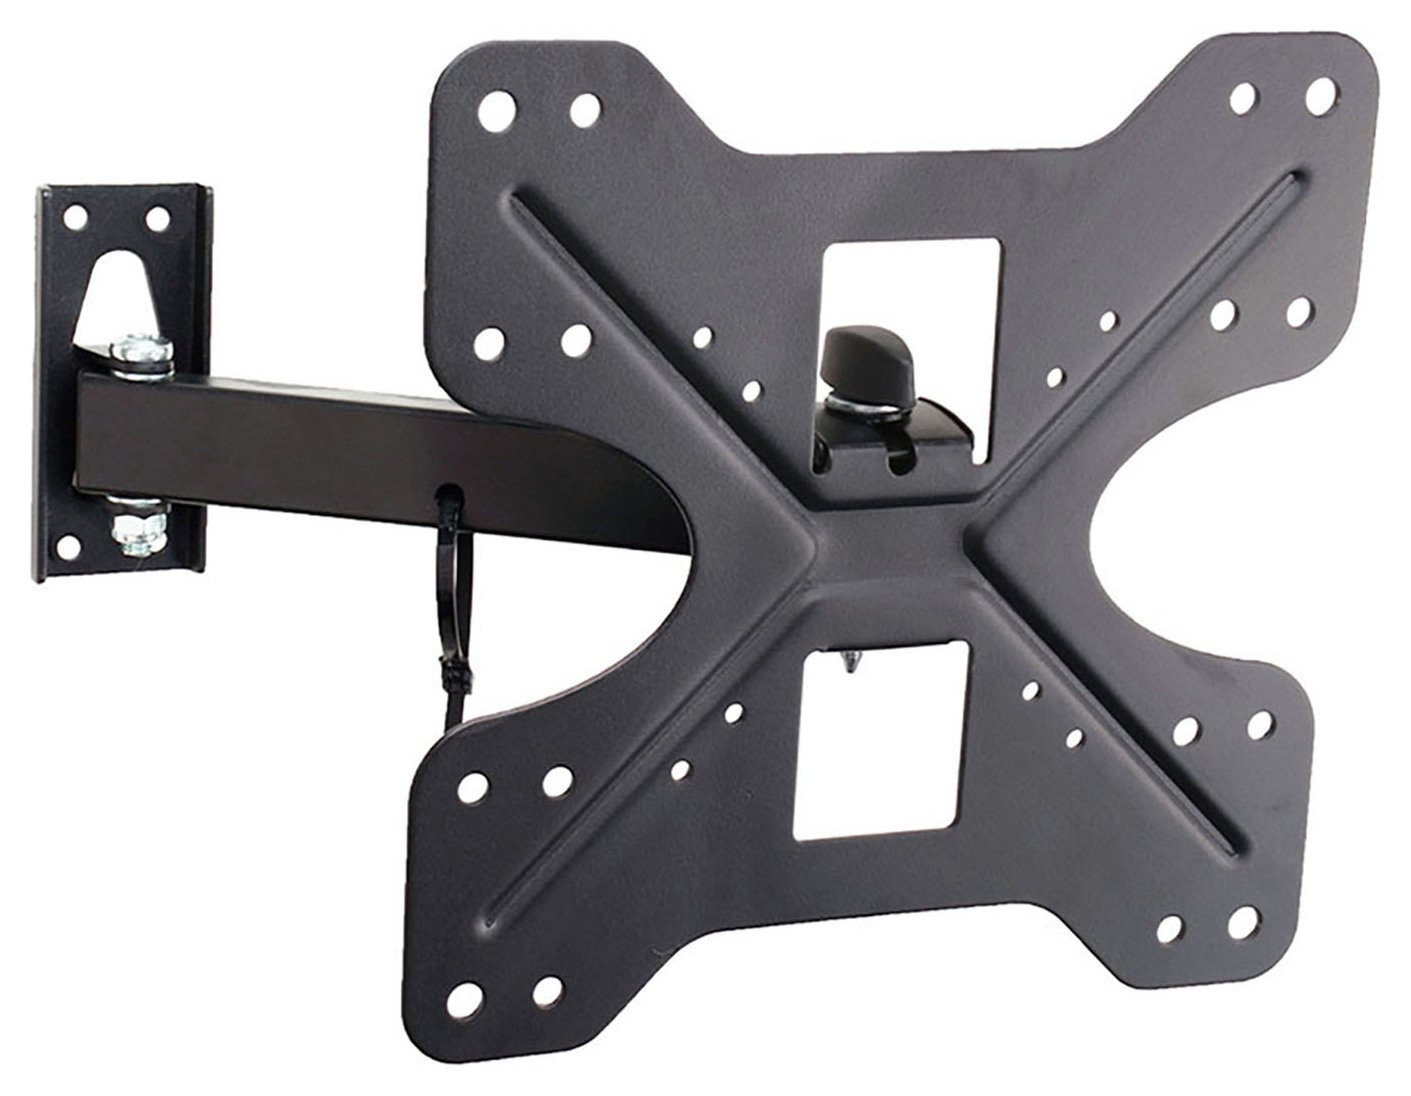 Standard Multi-Position 23 - 50 Inch TV Wall Bracket. Review